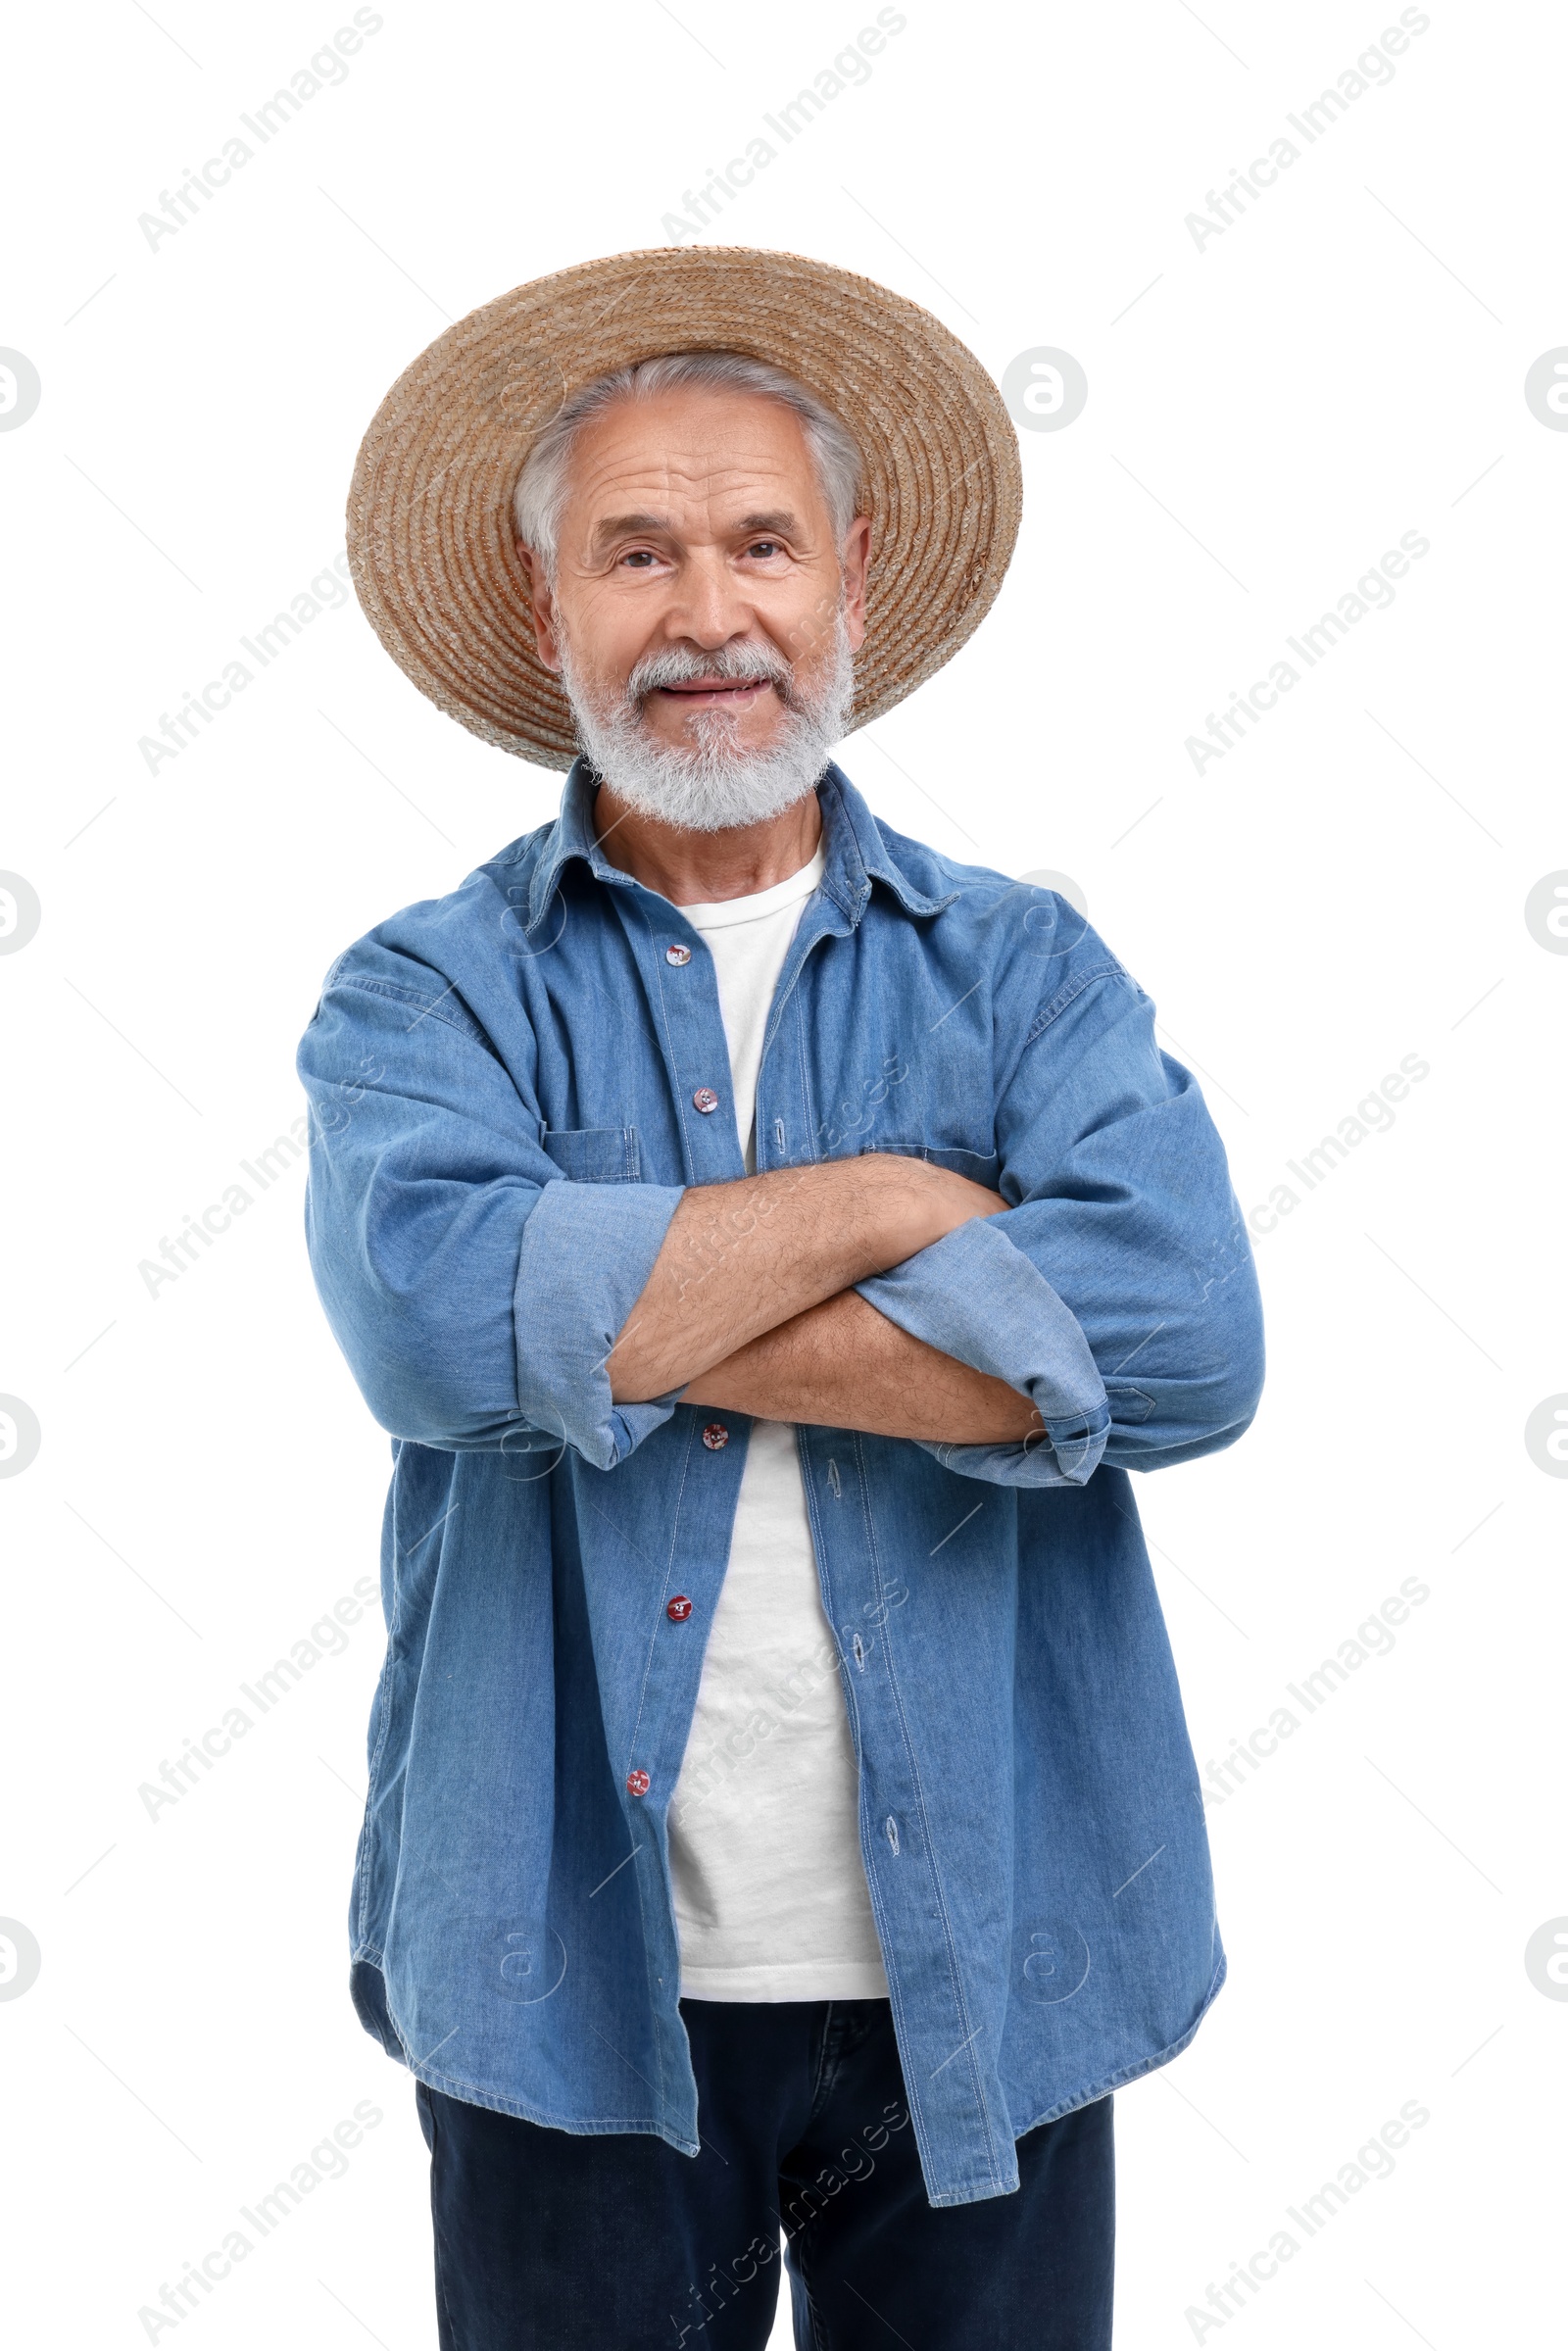 Photo of Farmer with crossed arms on white background. Harvesting season